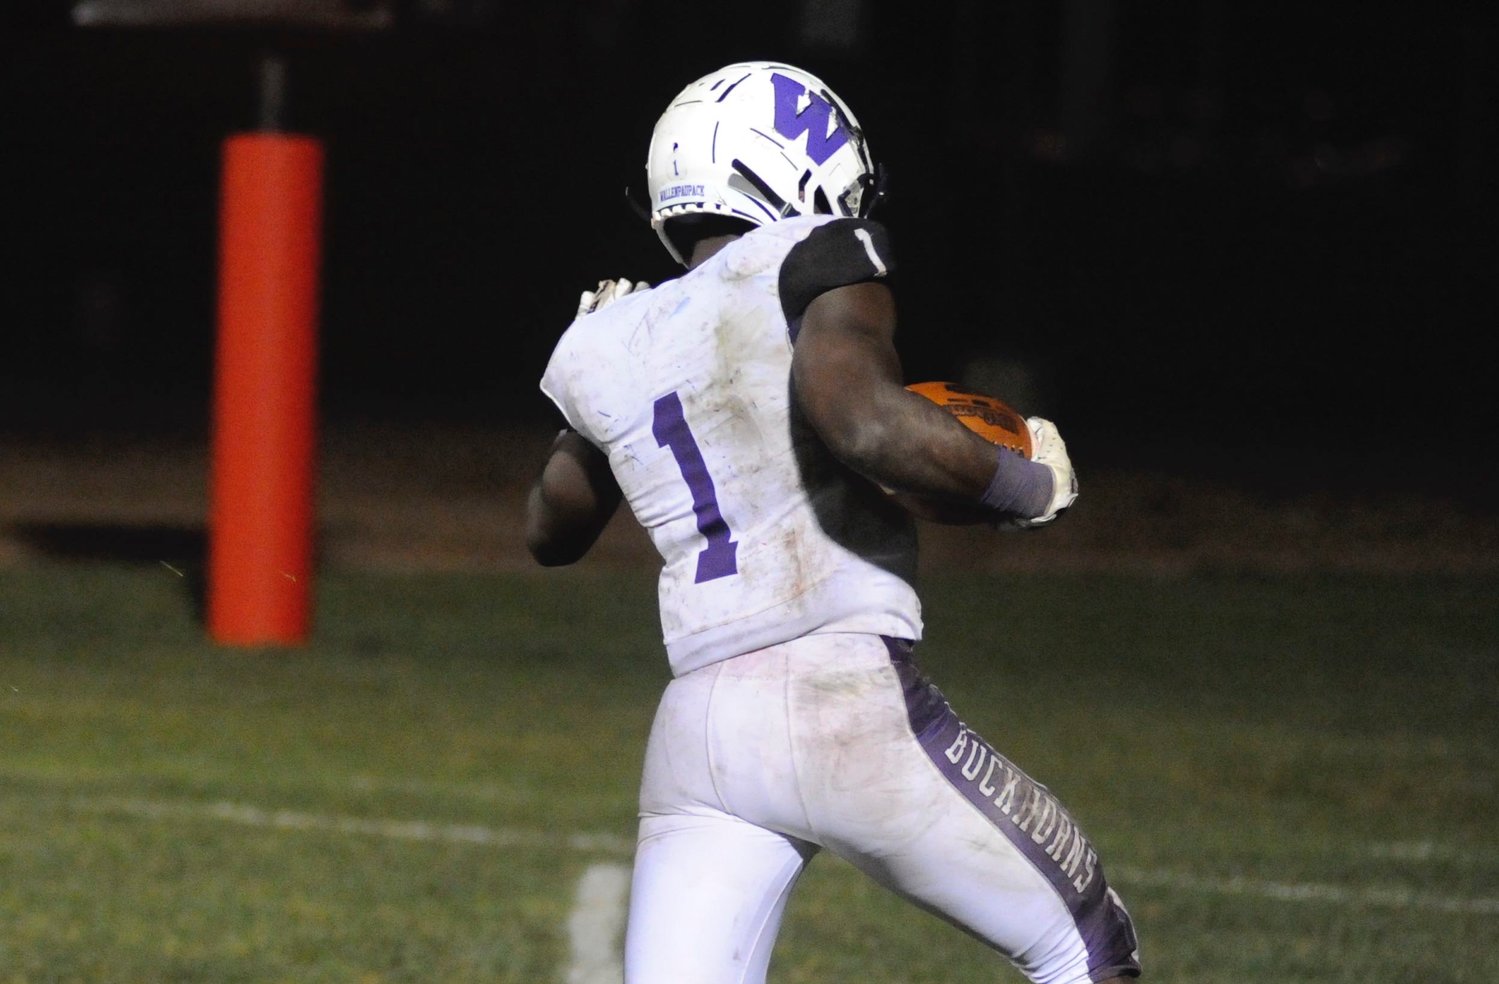 Eighteen-point man. Wallenpaupack’s Agyei Shadrak scored on a blistering 75-yard KO return to open up the second half at 11:49. In the second quarter he scored on a 20-yard reception, and in the final frame scored again on a 31-yard run, earning him a hat trick and the Shrine Bowl XXVIII MVP trophy.